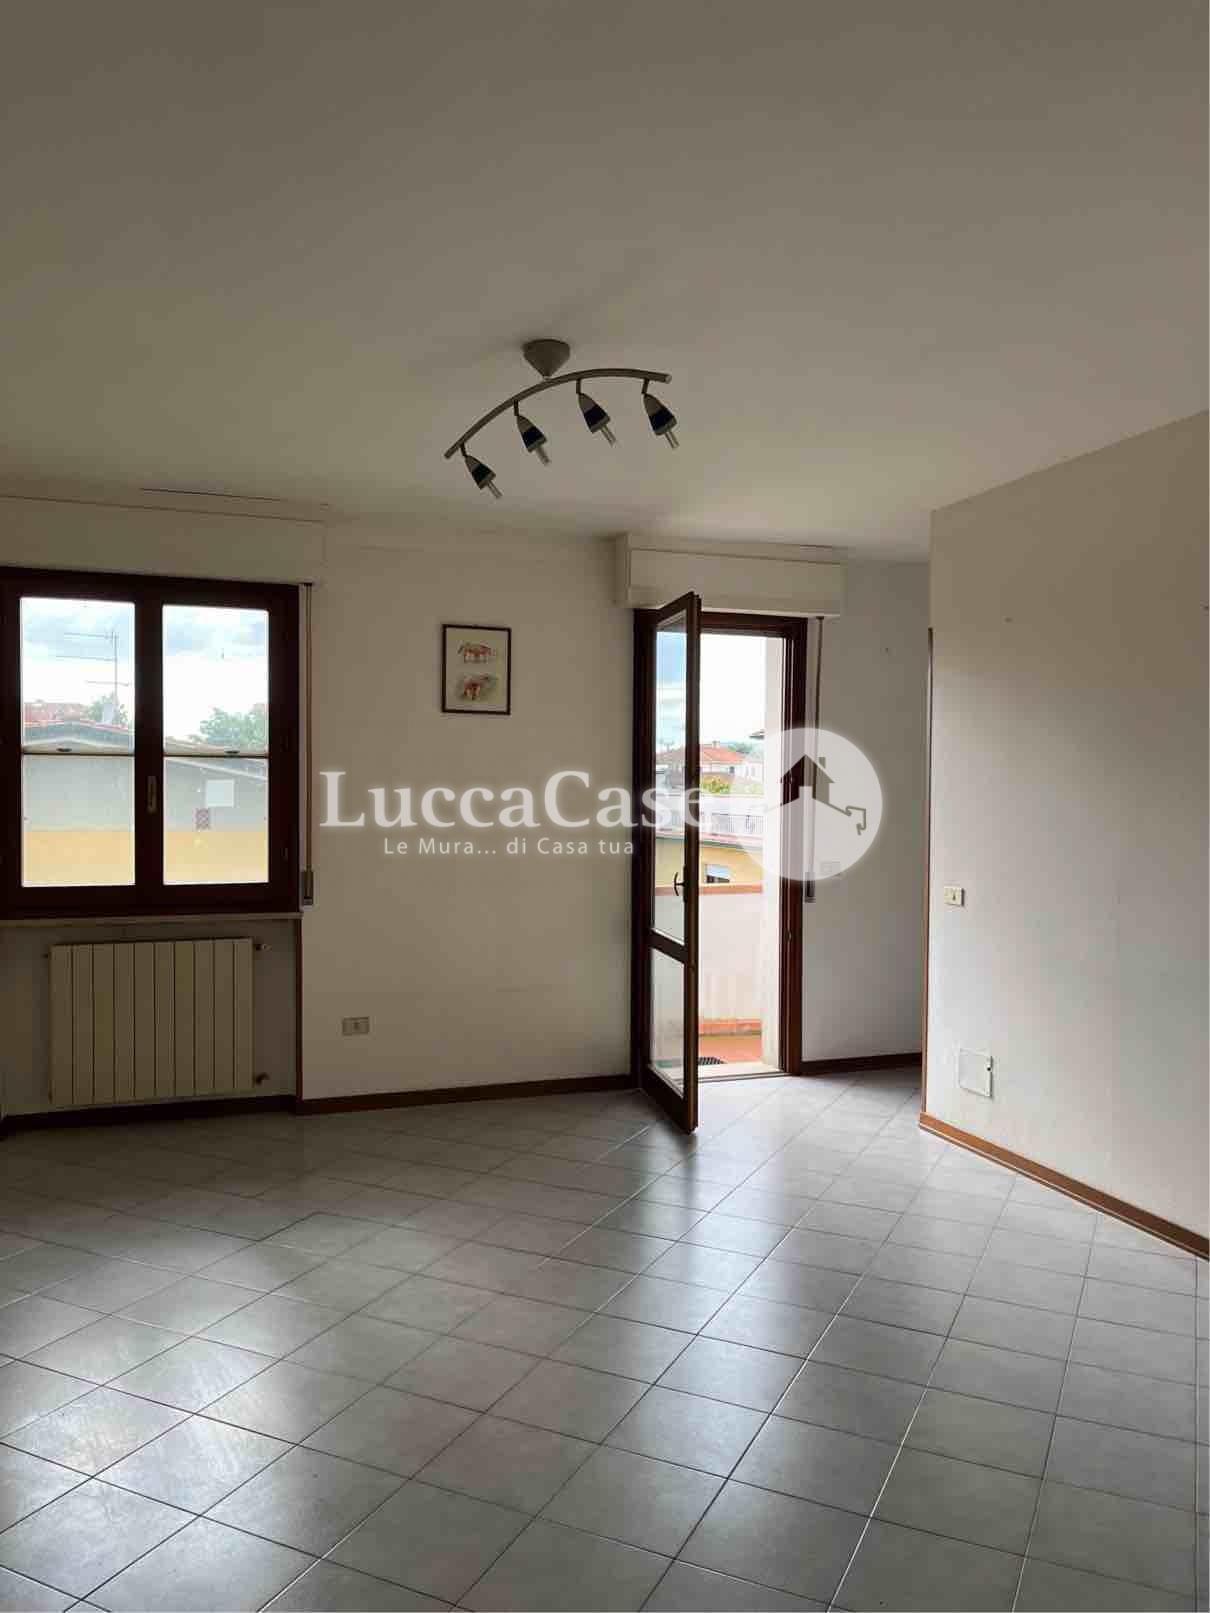 Apartment for sale, ref. N017X